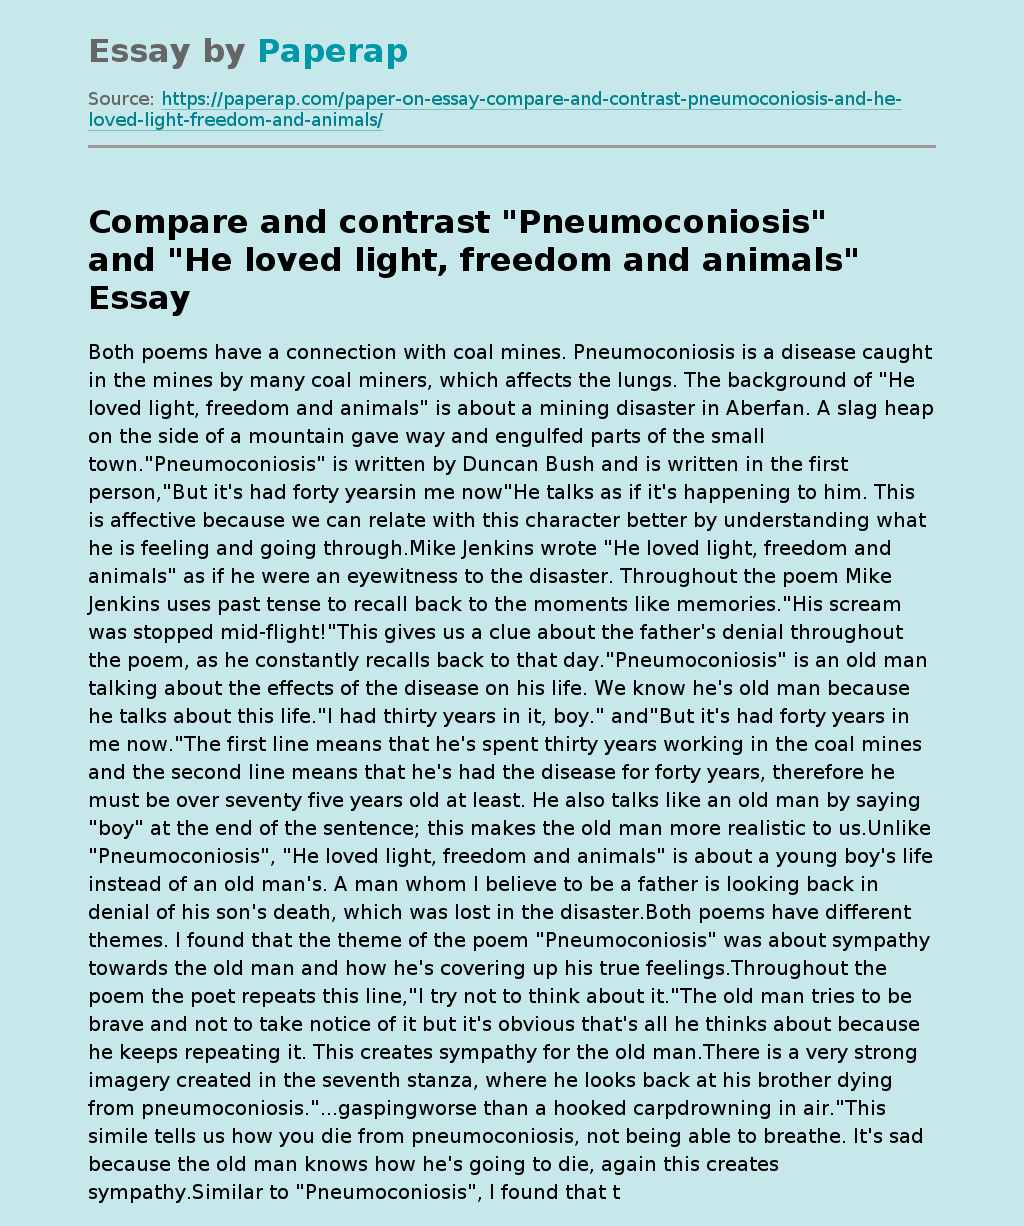 Compare and Contrast "Pneumoconiosis" and "He Loved Light, Freedom and Animals"